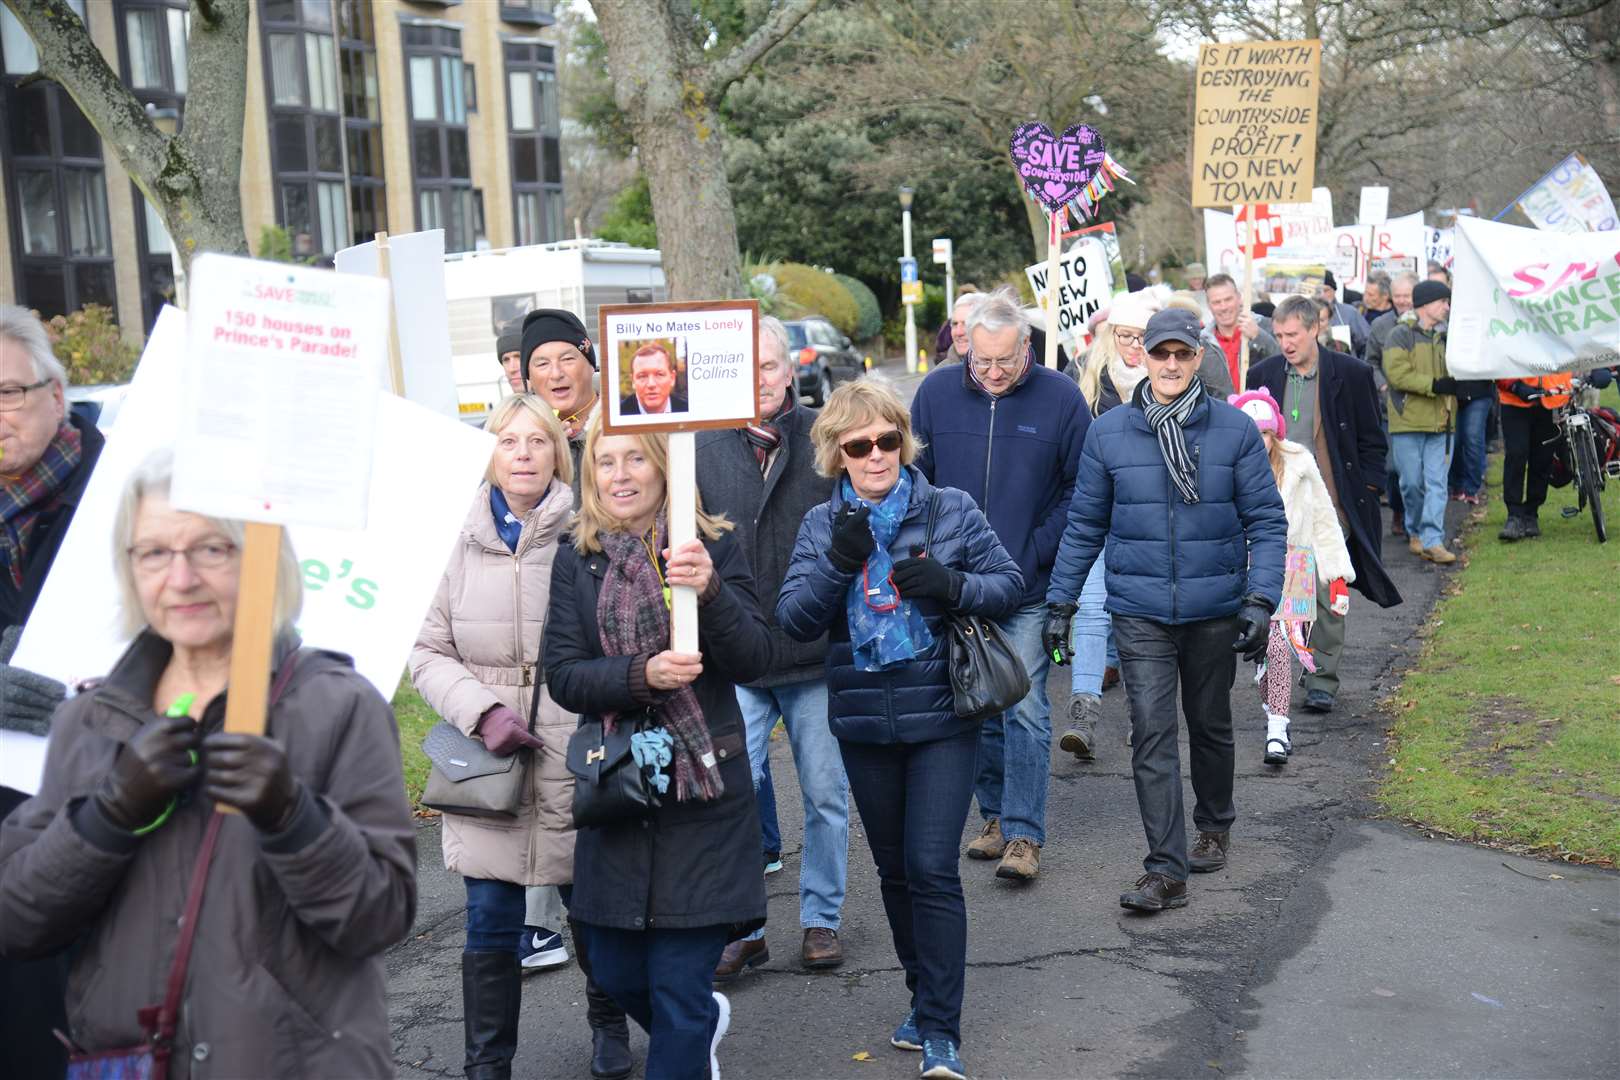 A protest march was held in December over the Otterpool Park plans and other developments in the district